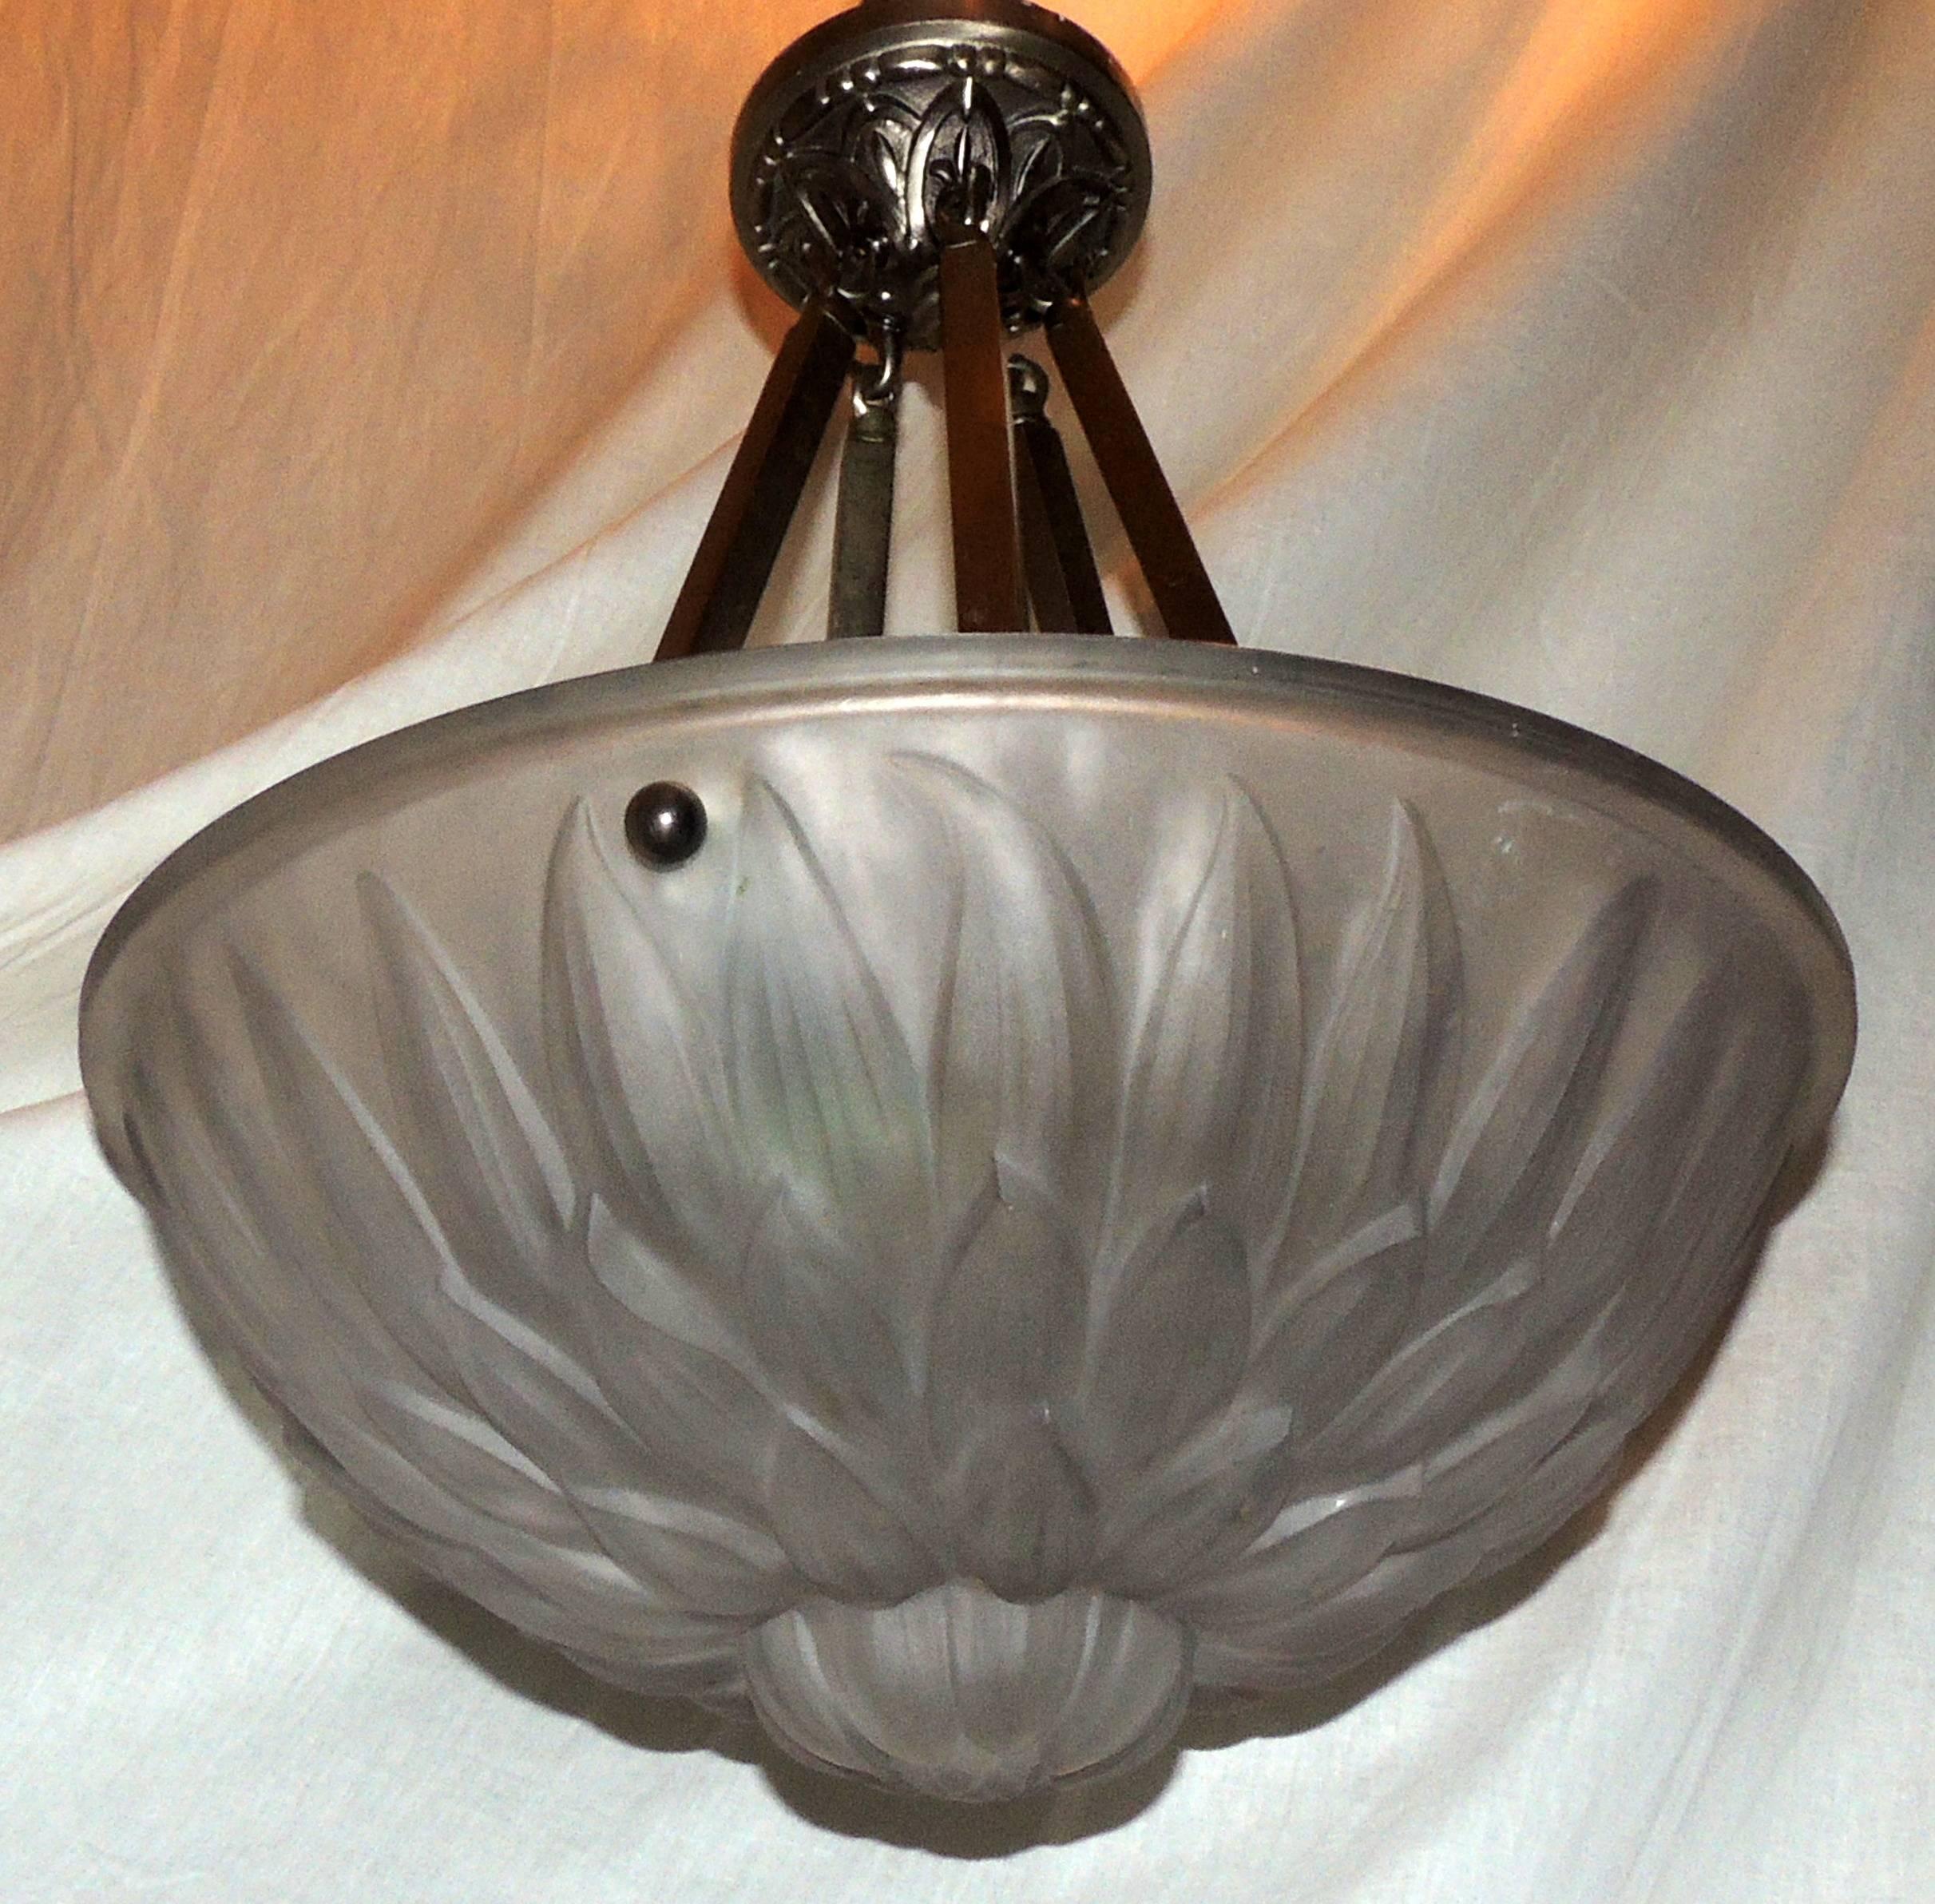 A wonderful French art deco frosted glass and brushed nickel bronze flower form three-light semi /hanging fixture.
Rewired and ready to install with mounting hardware included.